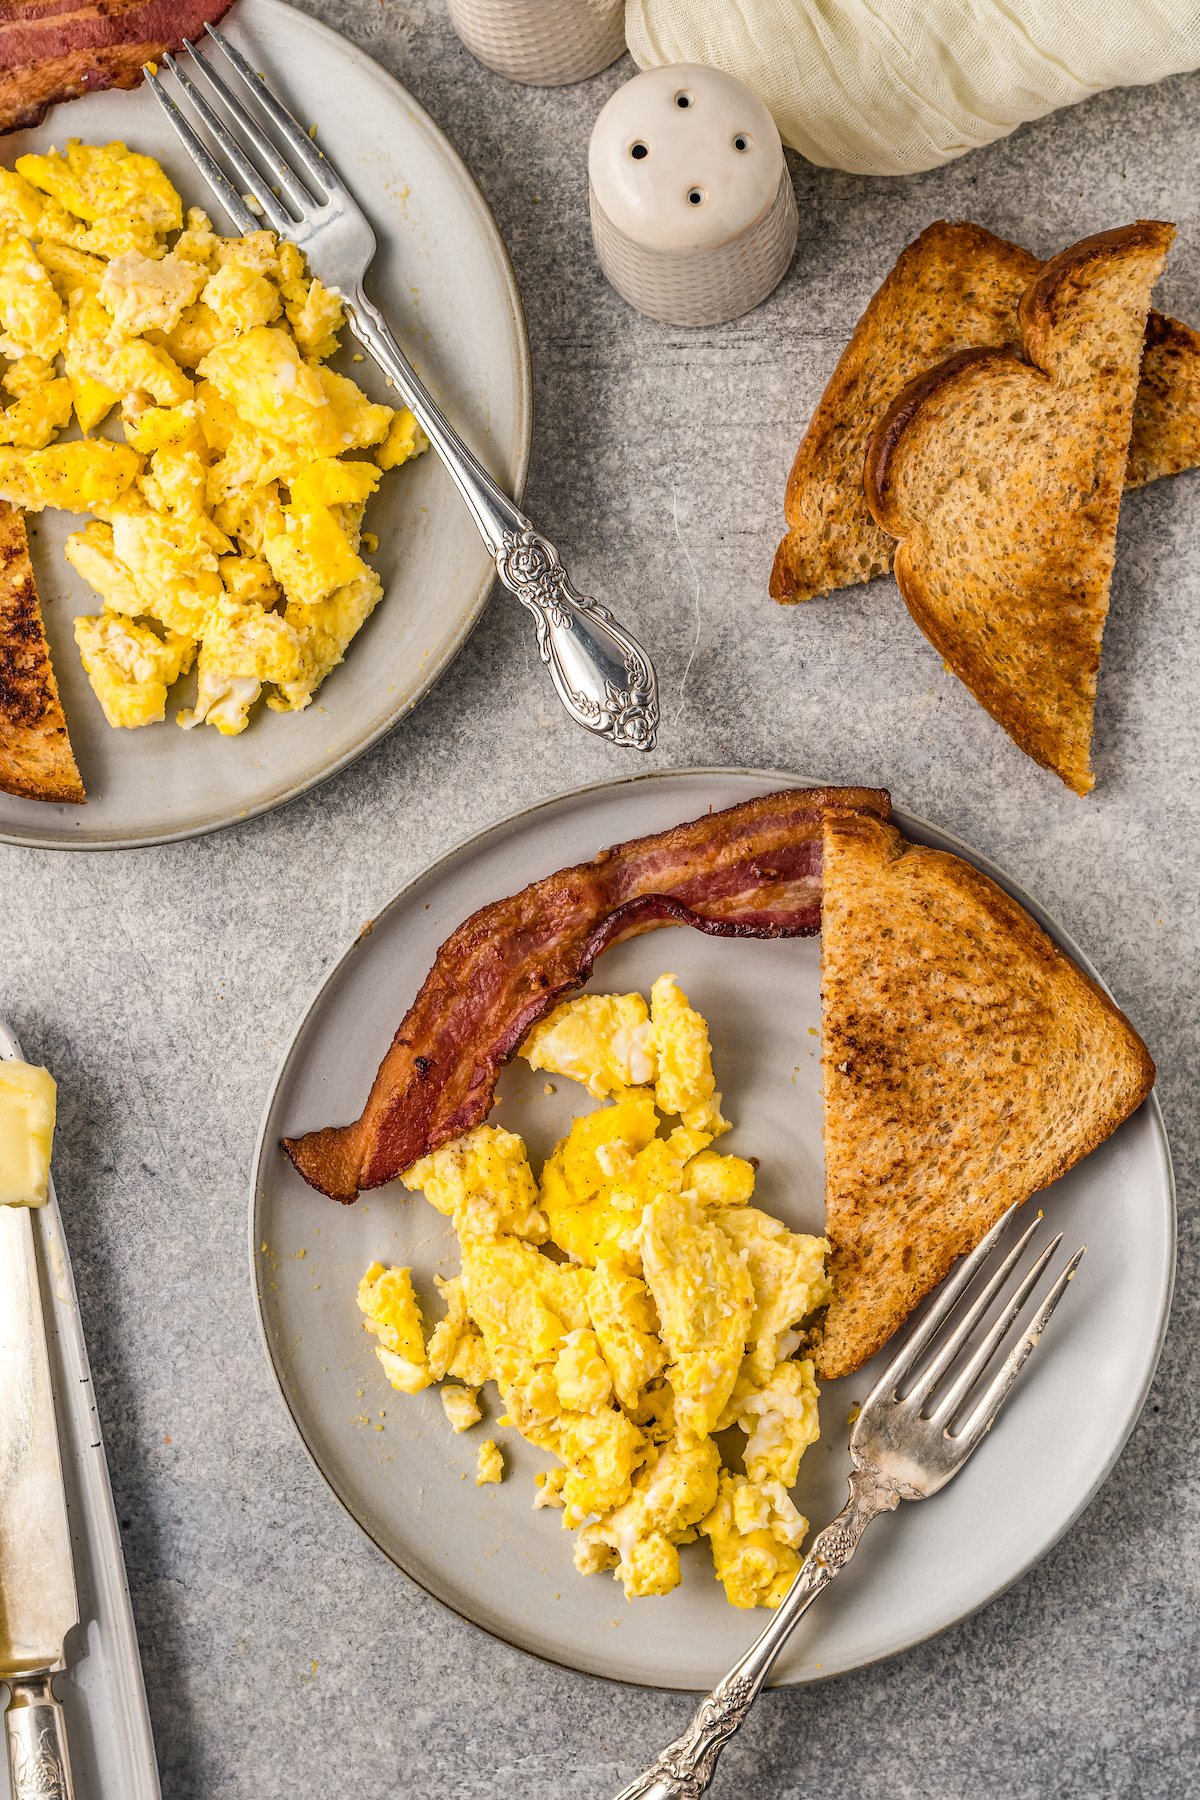 A breakfast spread of scrambled eggs on plates, next to toast and bacon.